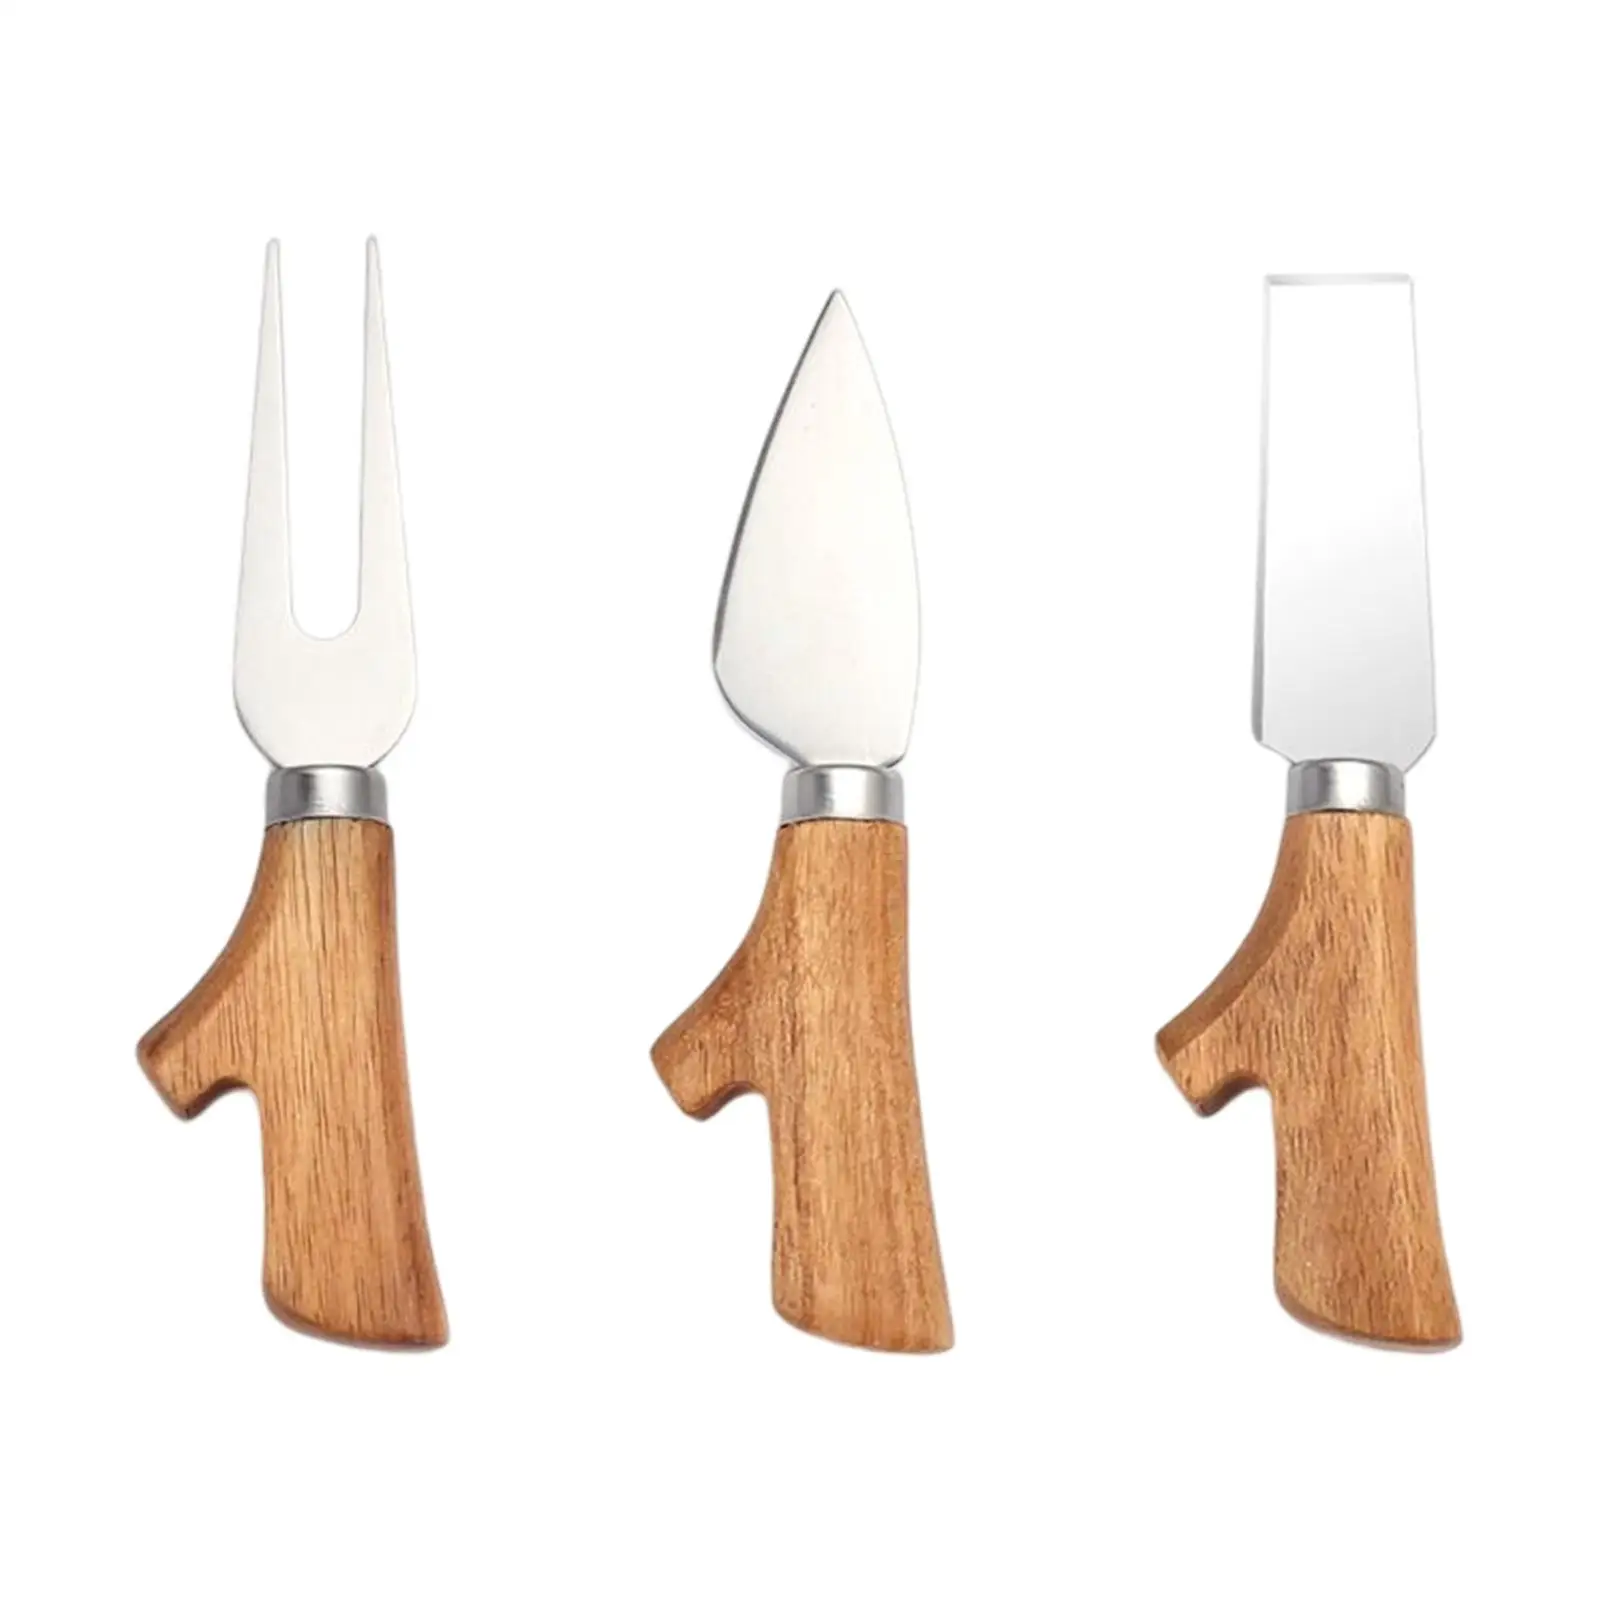 3Pcs Cheese Knives Set Wooden Handle Professional Accessories for Dessert Cheese Salad